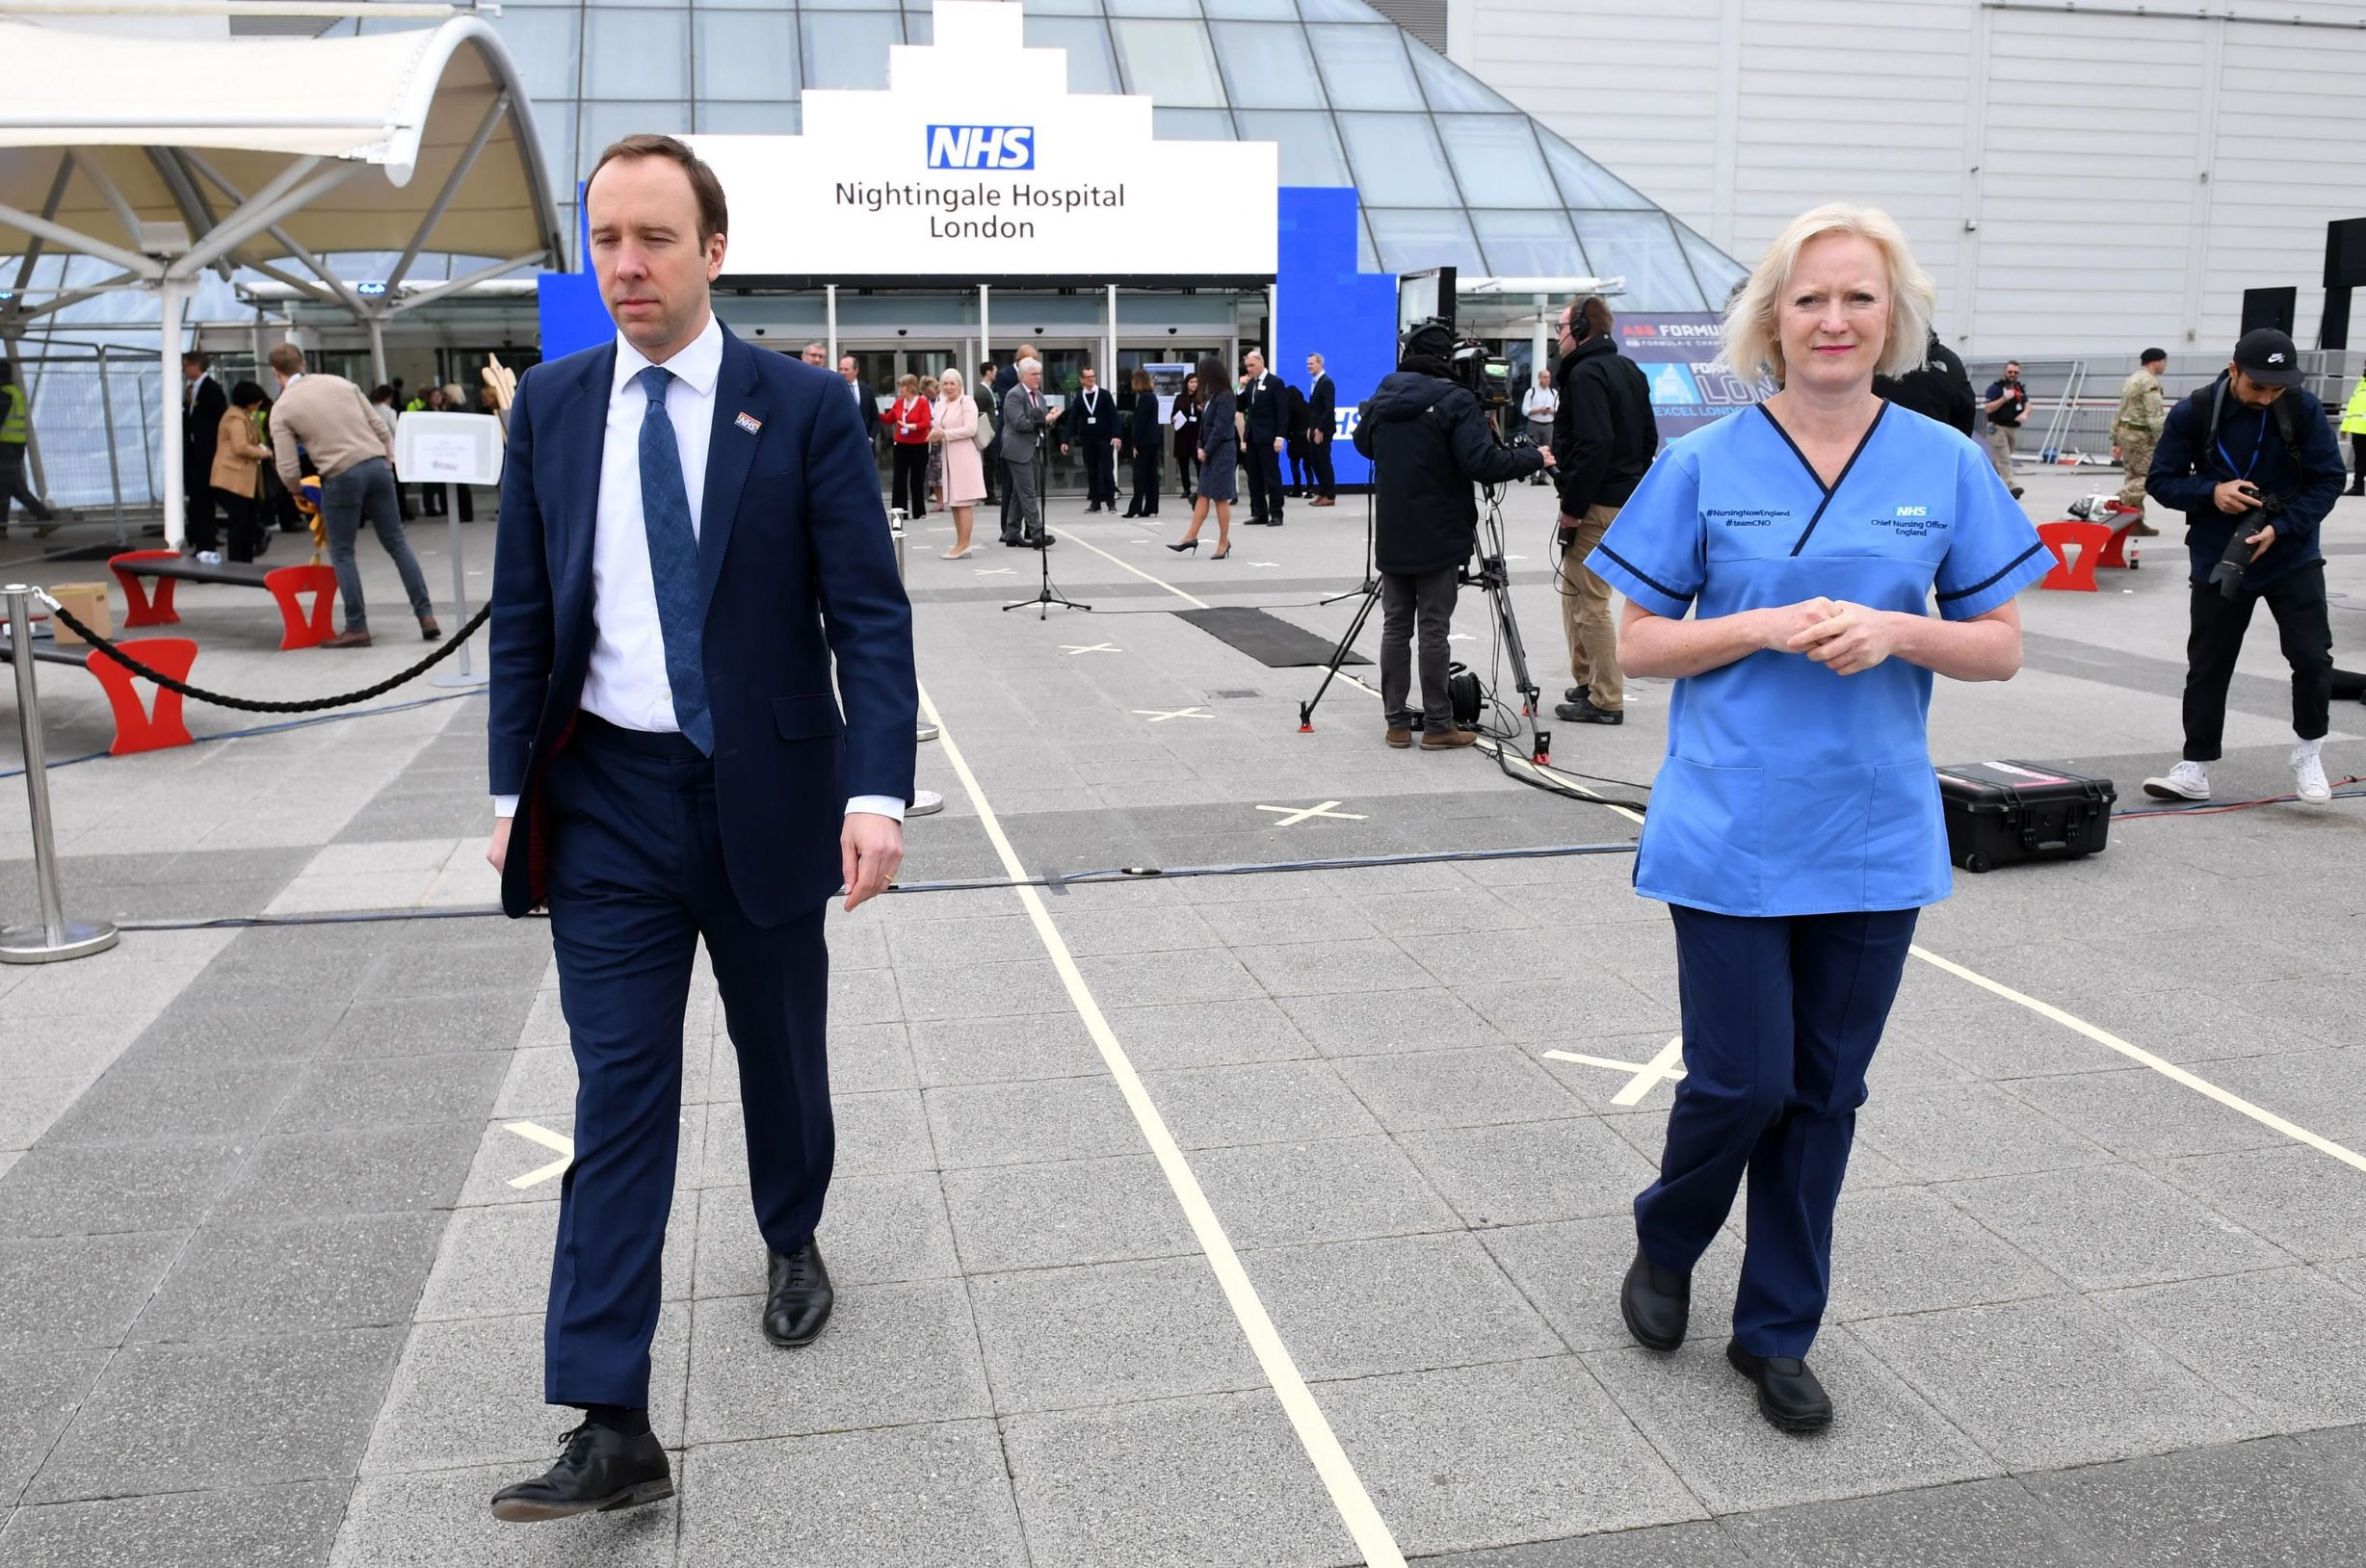 Britain's Health Secretary Matt Hancock (L) and chief nursing officer for England, Ruth May attend the opening of the 